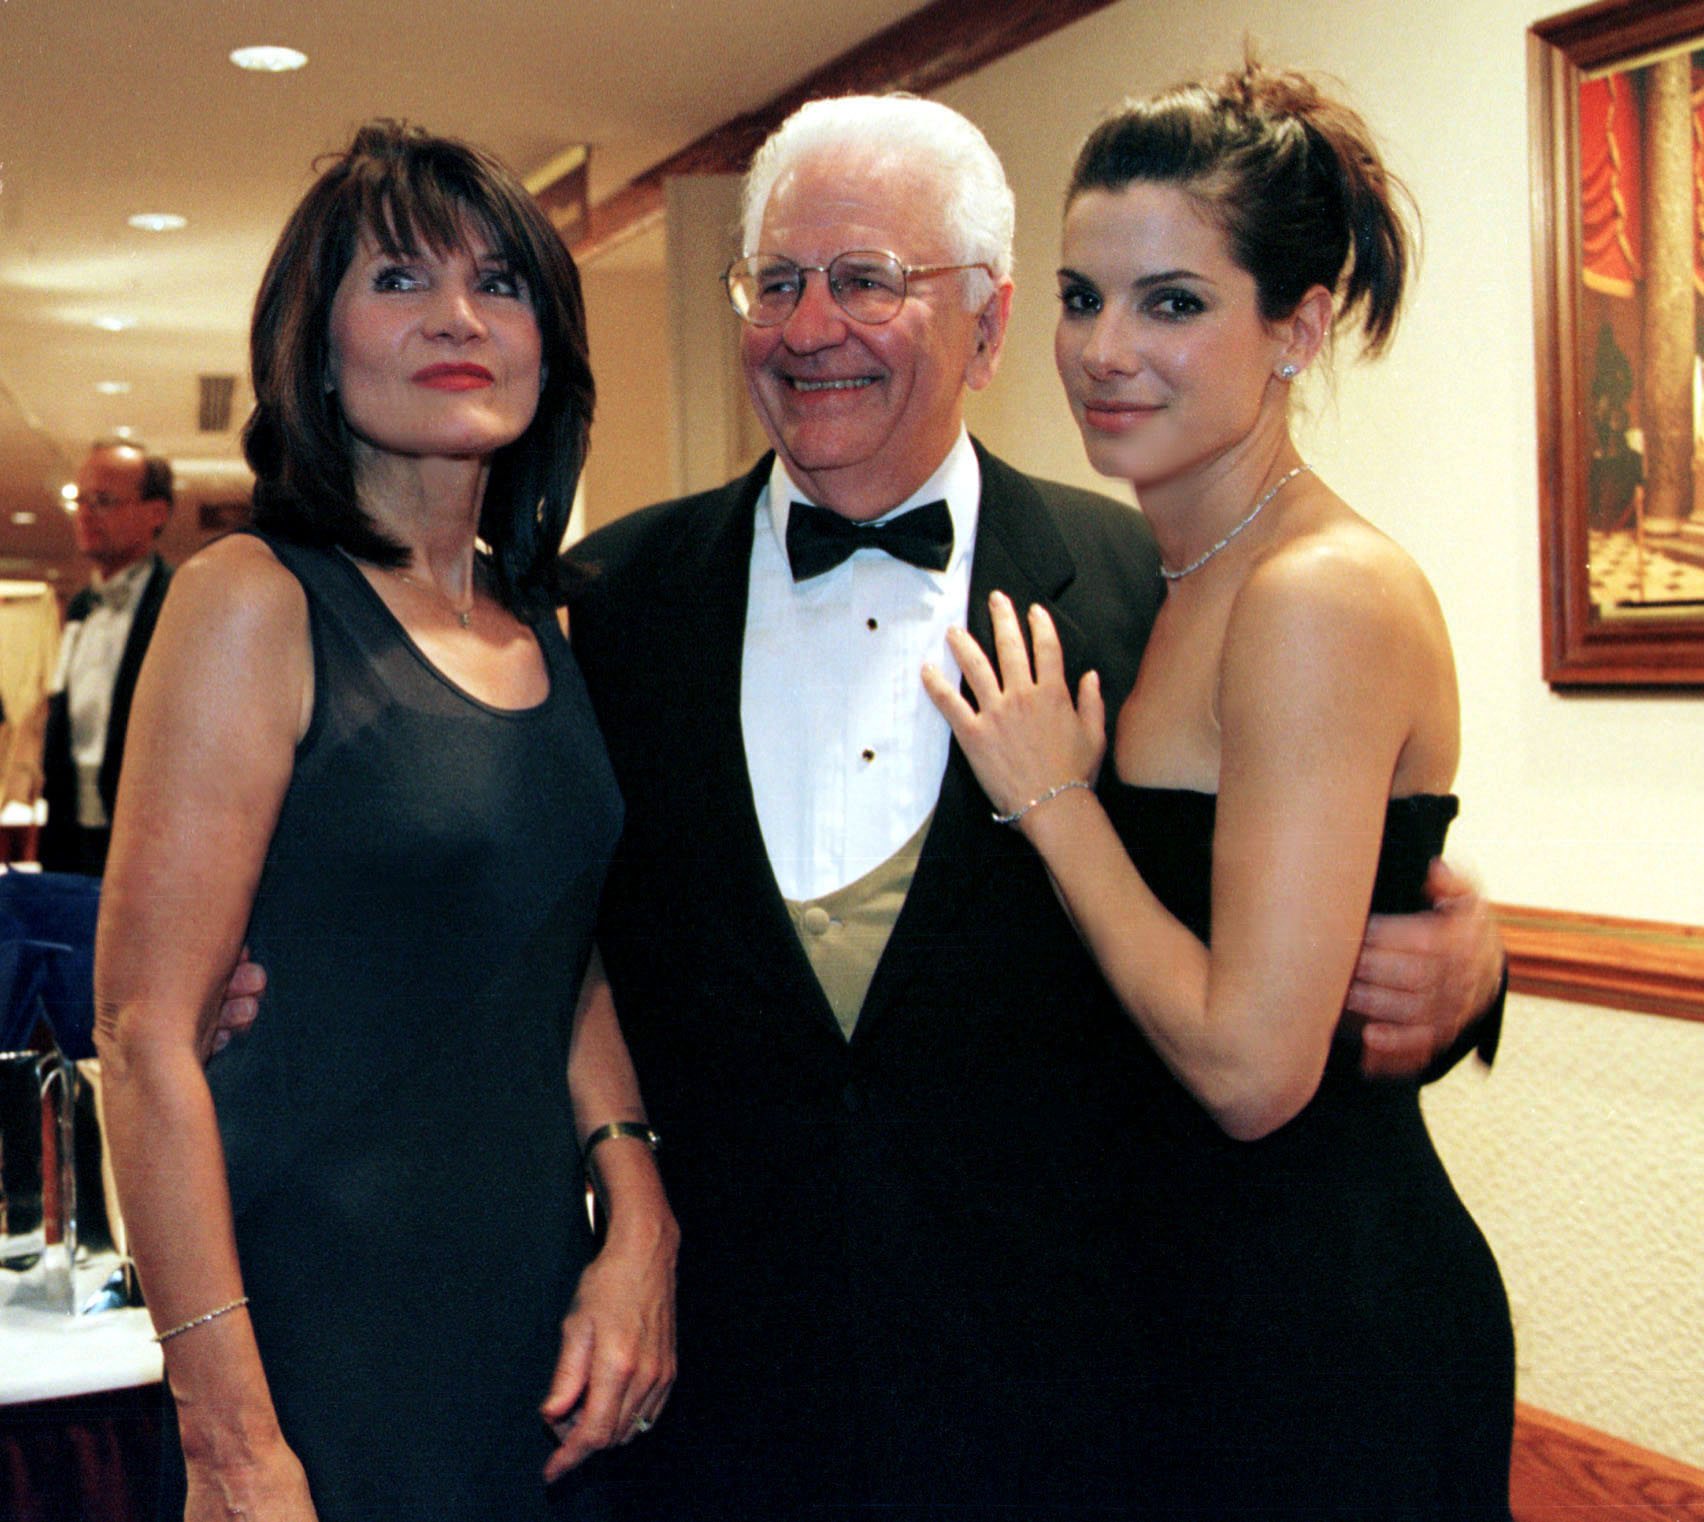 Helga Meyer, John Bullock, and Sandra Bullock at the Lombardi Gala to benefit cancer research at Georgetown University Hospital in 1998 | Source: Getty Images